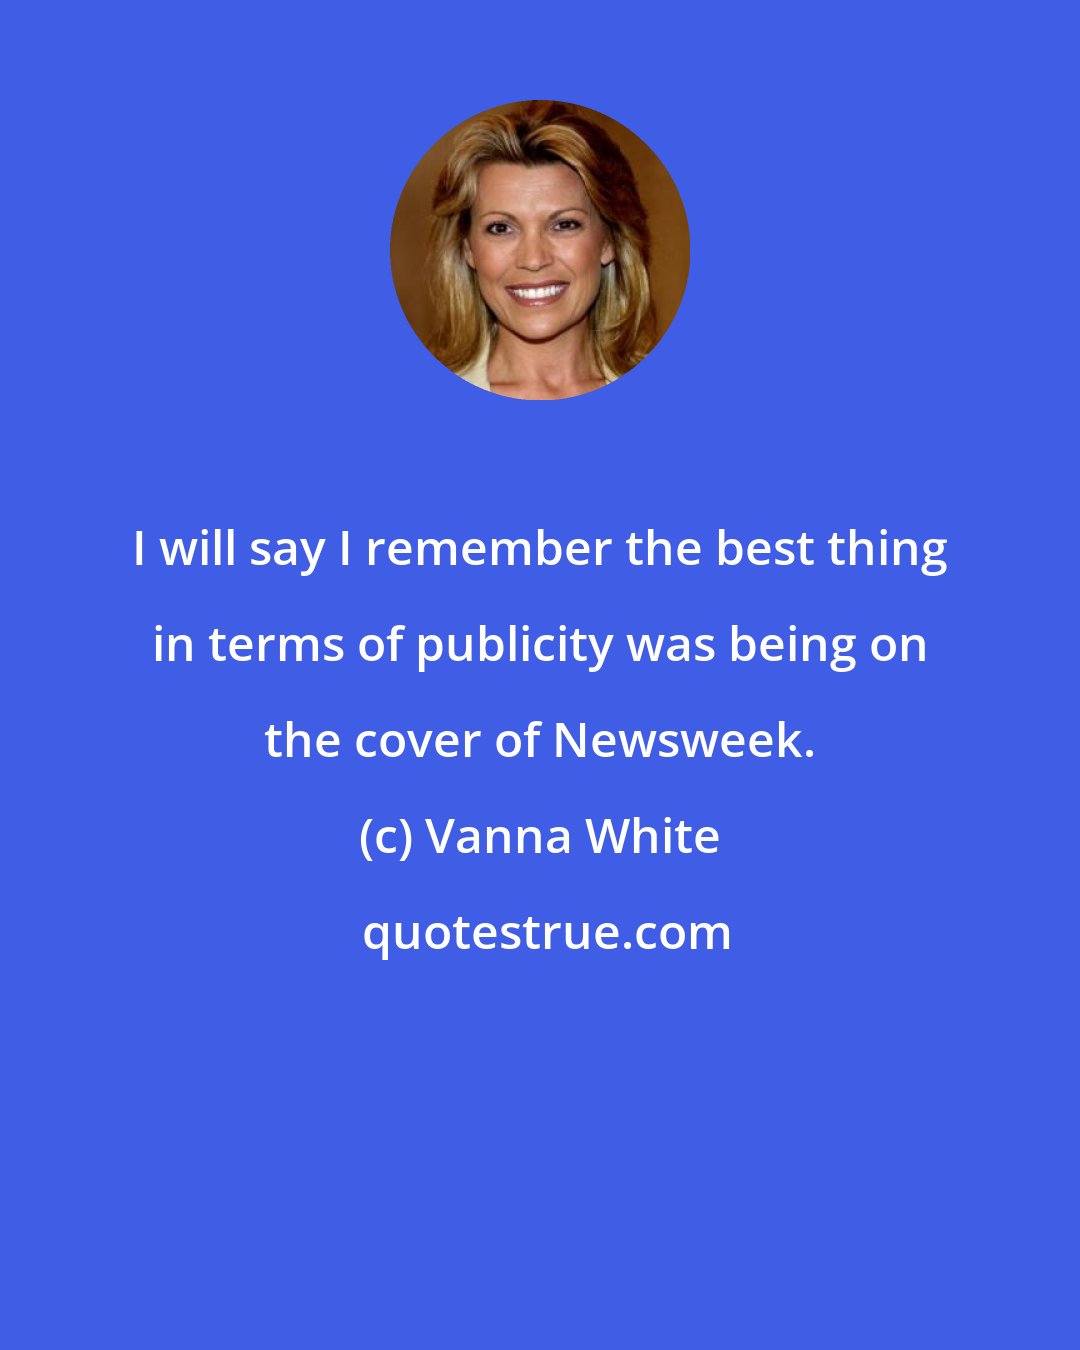 Vanna White: I will say I remember the best thing in terms of publicity was being on the cover of Newsweek.